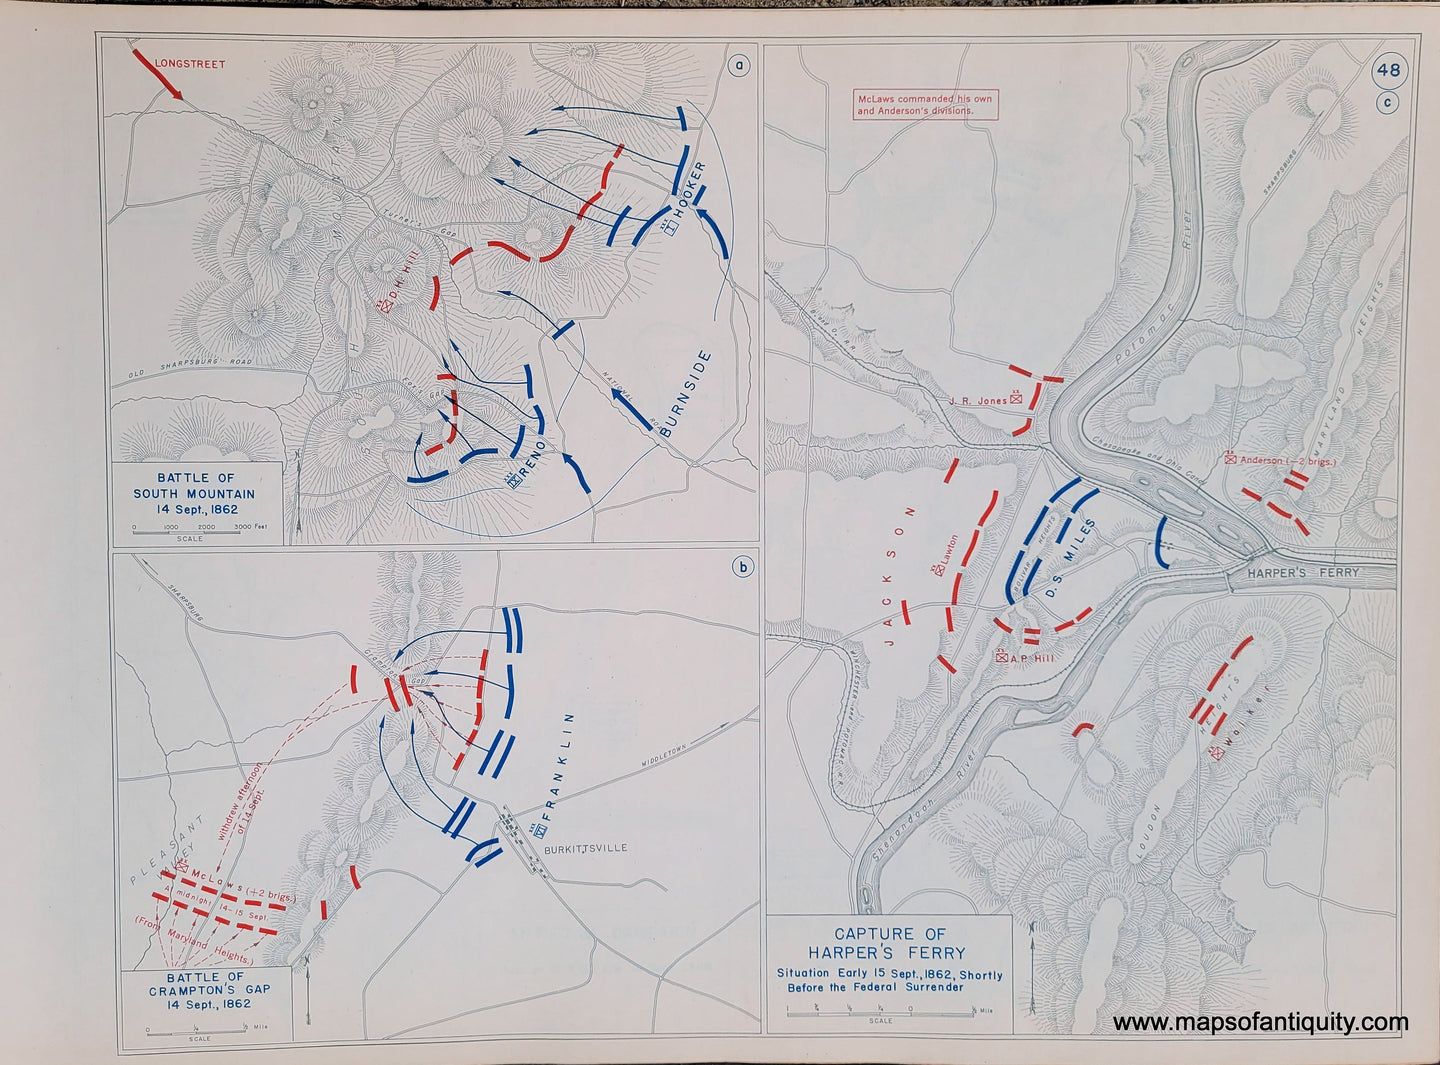 Genuine-Antique-Map-Battle-of-South-Mountain-14-Sept--1862-Battle-of-Crampton's-Gap-14-Sept--1862-Capture-of-Harper's-Ferry-Situation-Early-15-Sept--1862-Shortly-Before-the-Federal-Surrender-1948-Matthew-Forney-Steele-Dept-of-Military-Art-and-Engineering-US-Military-Academy-West-Point-Maps-Of-Antiquity